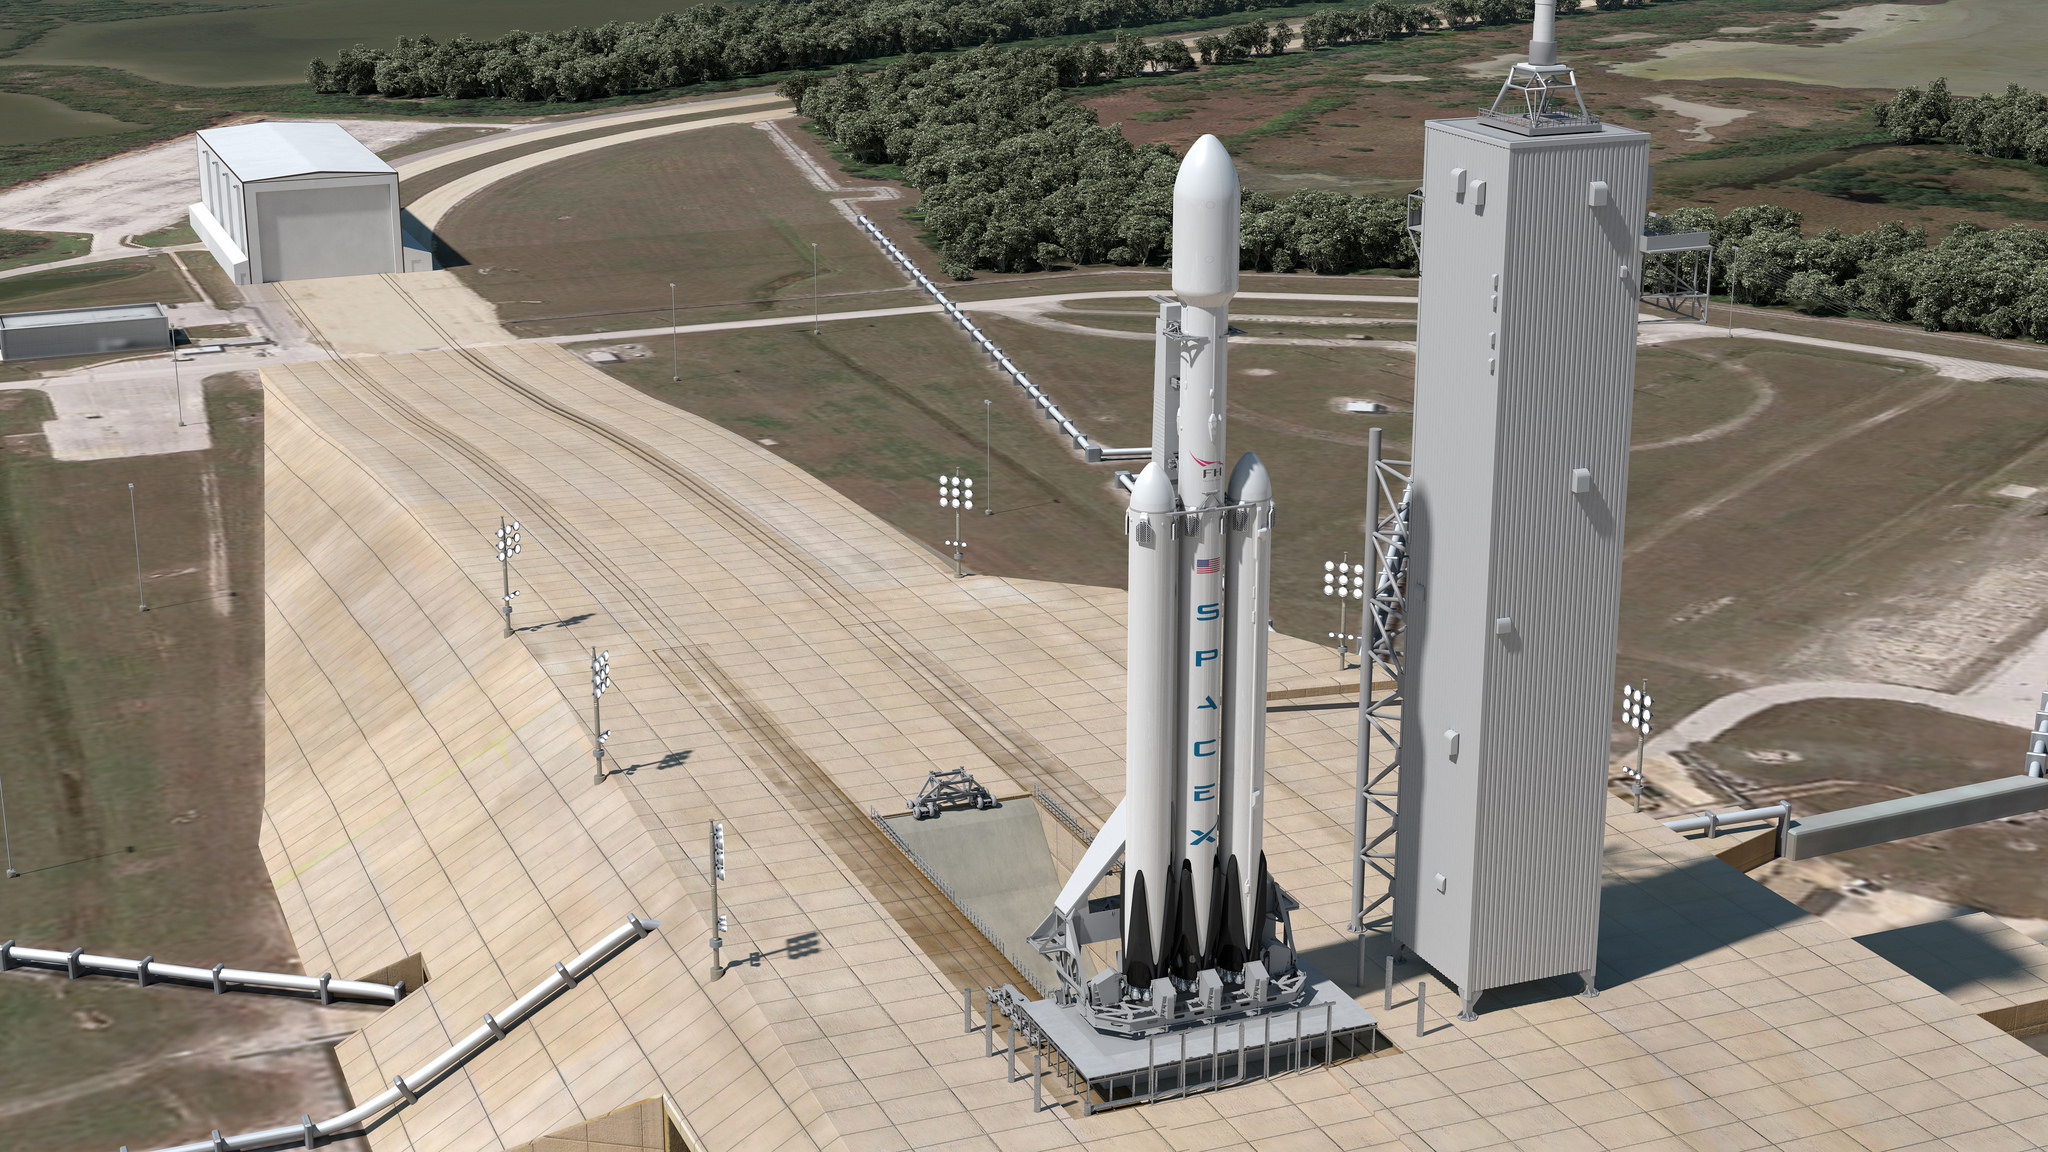 Download Spacex Launch Pad Images